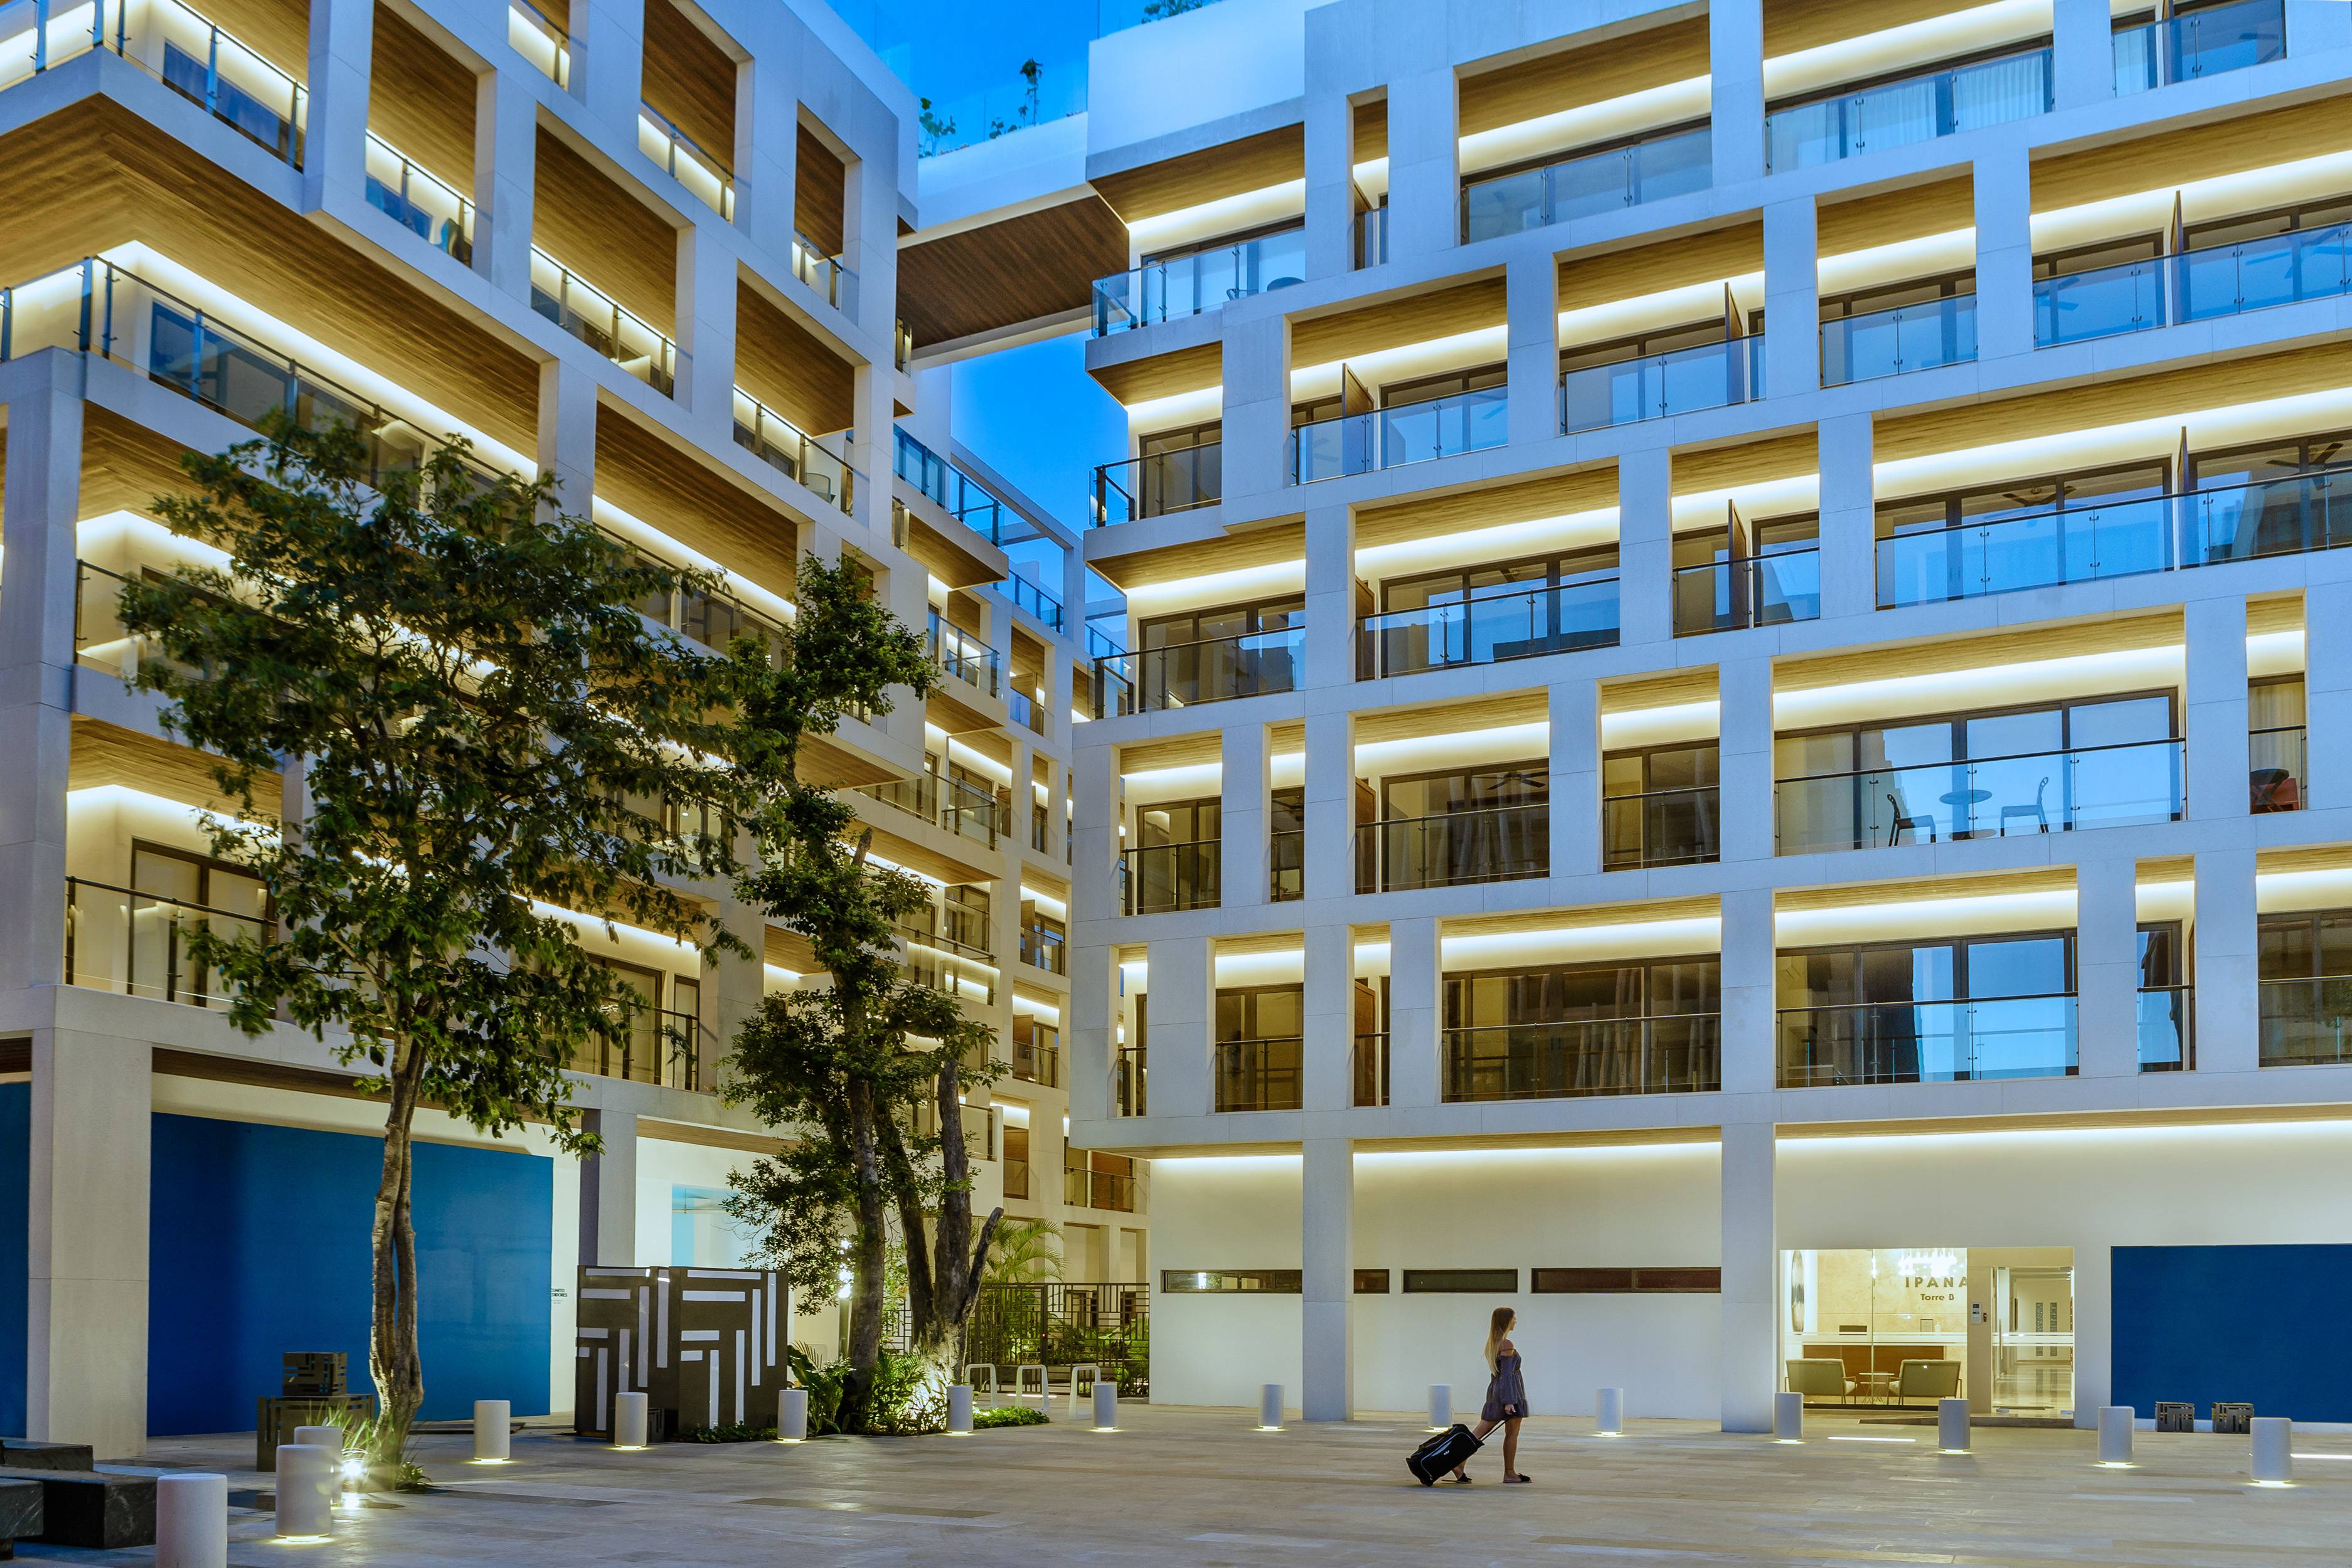 EXCLUSIVE LOCATION: 2-BEDROOM, 2-BATHROOM + 2-BALCONIES, CORNER-UNIT, ON 38TH & 10TH WITH THE BEST LIFESTYLE AMENITIES IN PLAYA DEL CARMEN! - IPANA UNIT B-305